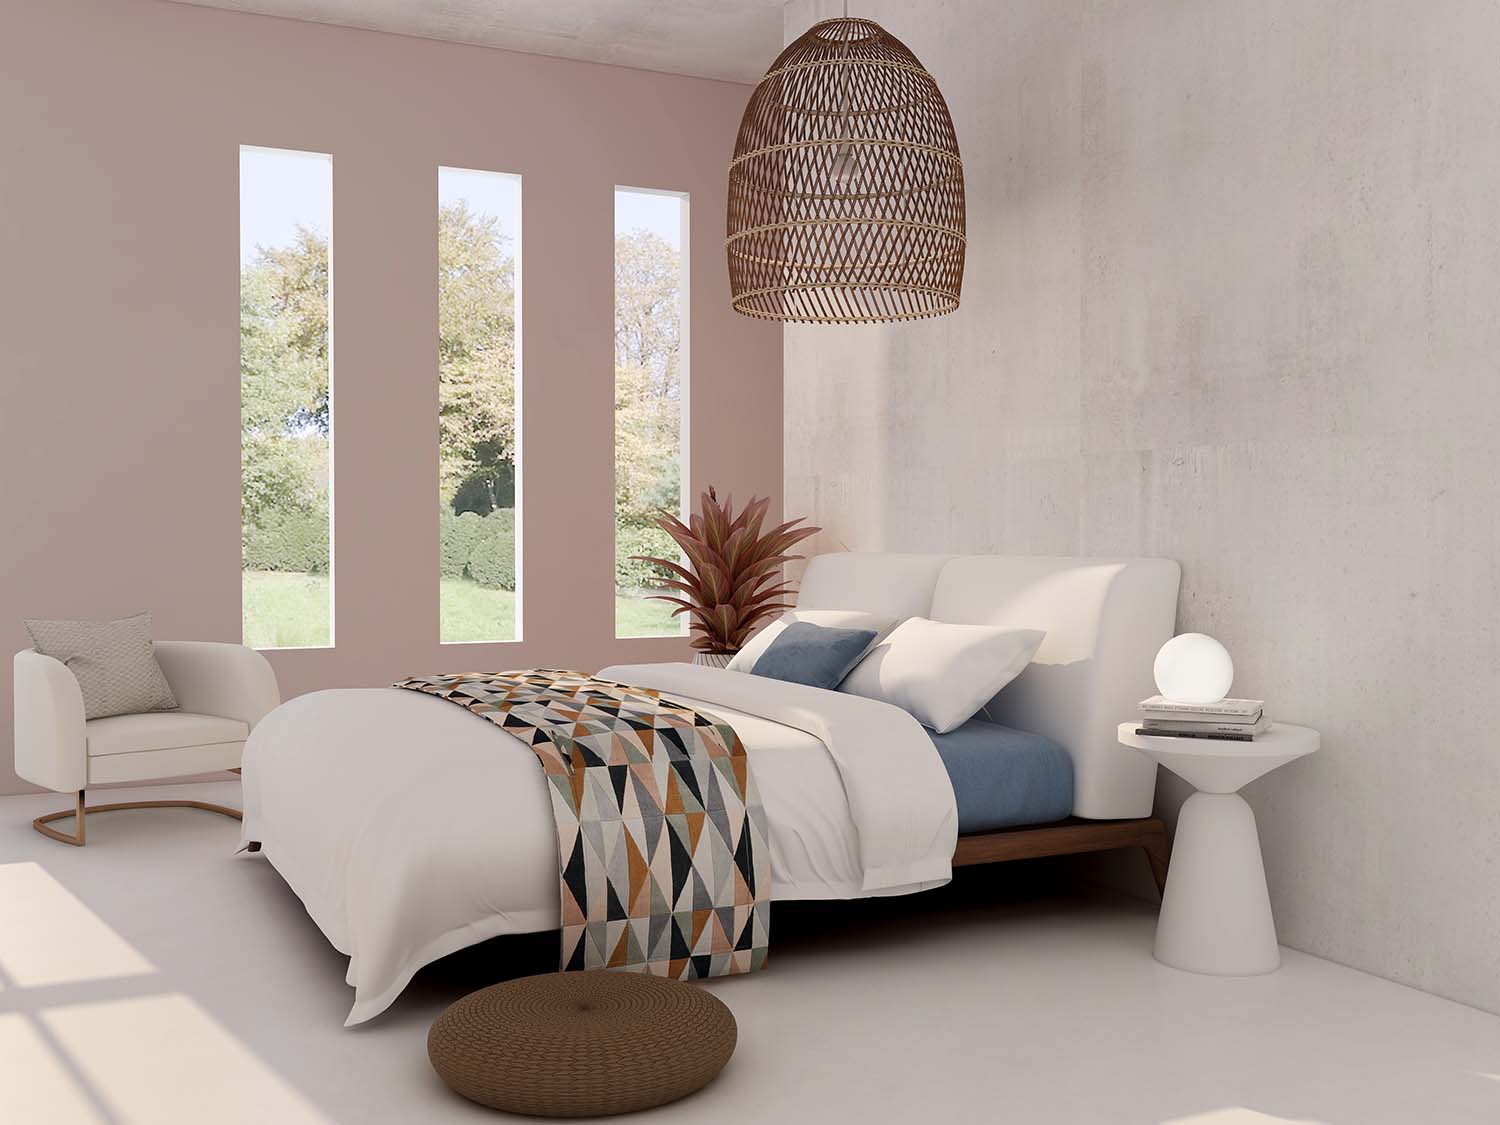 Bedroom Design Ideas: Want to spruce up your bedroom?  Here are some useful interior design tips